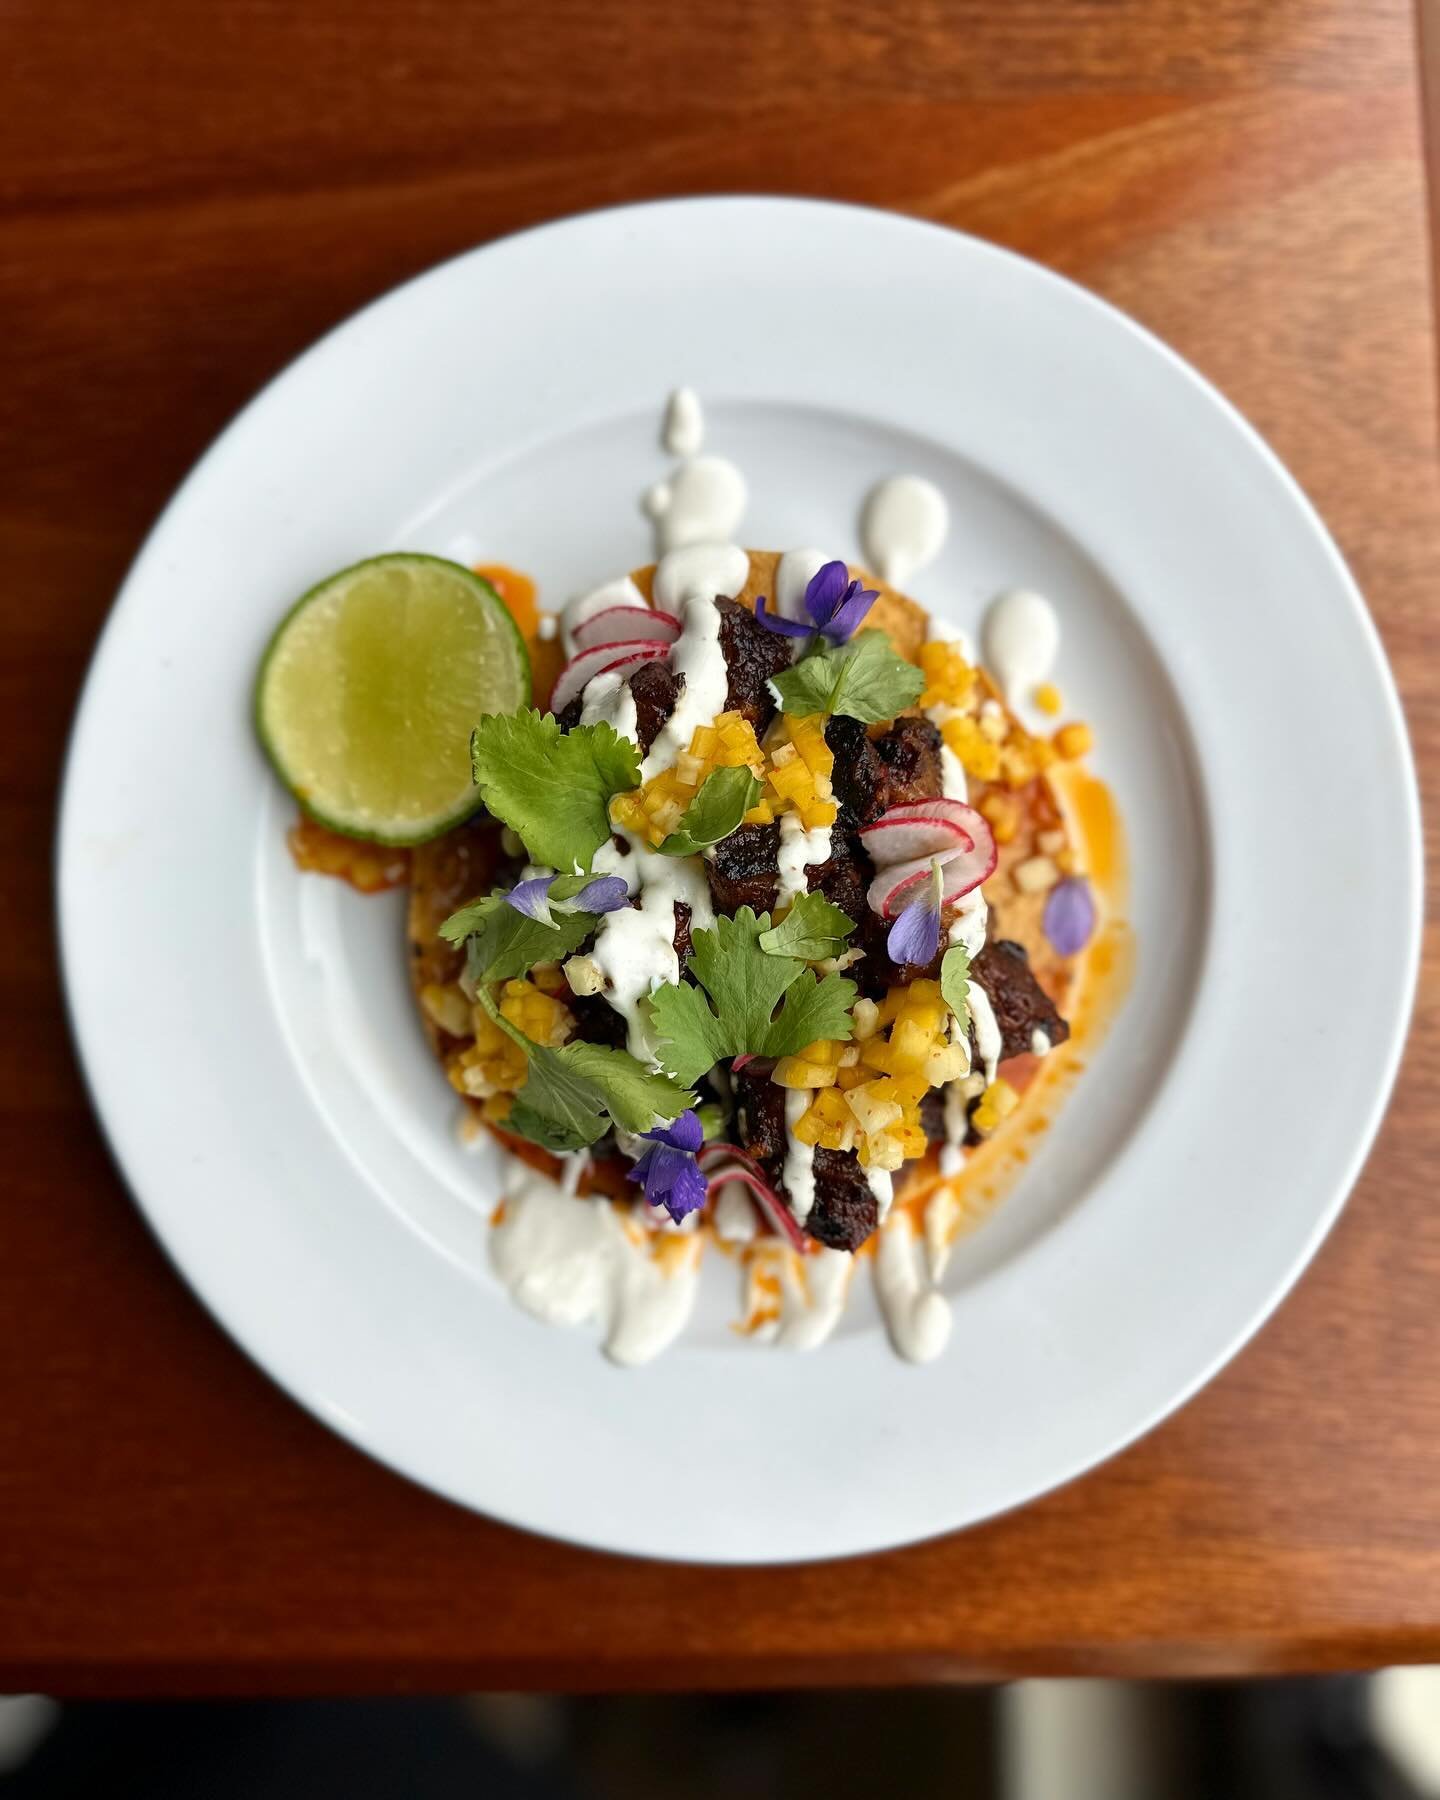 Did you know we make some pretty bangin&rsquo; specials? Like this one from last week:

𝗔𝗟 𝗣𝗔𝗦𝗧𝗢𝗥 𝗧𝗢𝗦𝗧𝗔𝗗𝗔 w/ @sevenseedsorganic pork jowel, @tortilleriazepeda tortilla , radish, pineapple &amp; mango relish, and crema.

Did you catch t